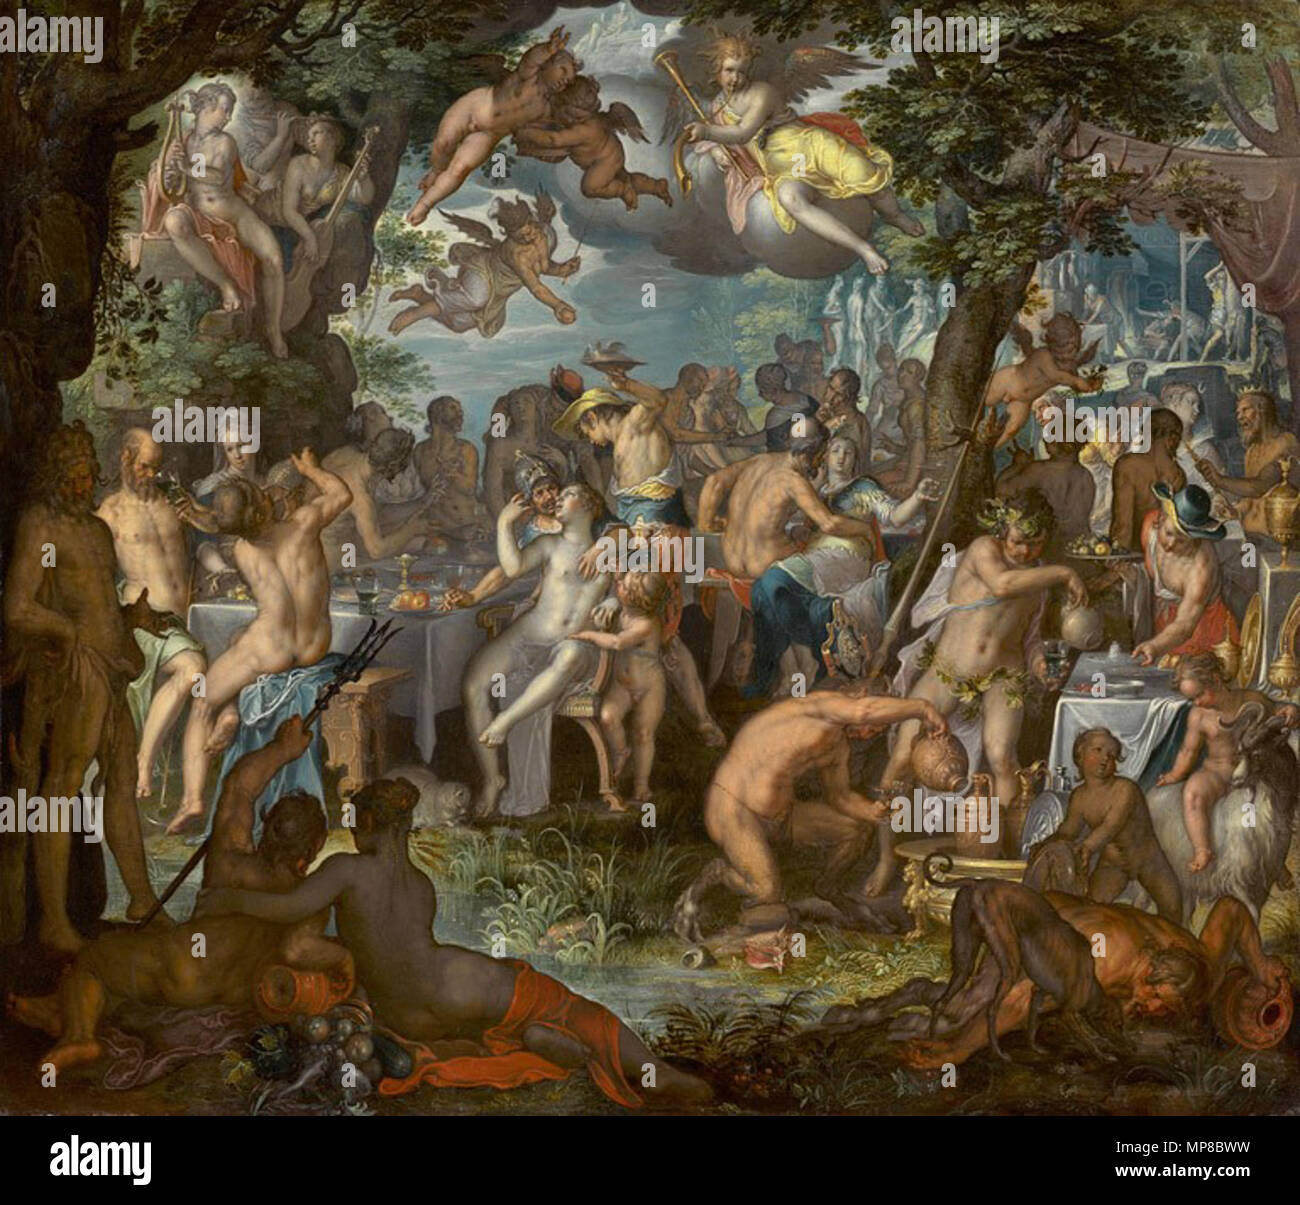 The Wedding of Peleus and Thetis  1612.   Joachim Wtewael  (1566–1638)     Alternative names Joachim Uytewael, Joachim Uyttewael, Joachim Wtenwael, Joachim Antonisz. Wtewael, Joachim Wttewael, Joachim Tonisz. Wttewaal  Description Dutch painter and draughtsman  Date of birth/death 1566 1 August 1638  Location of birth/death Utrecht Utrecht  Work location Padua (1586-1590), France (1590-1592), Utrecht (1592-1638)  Authority control  : Q541644 VIAF: 64878607 ISNI: 0000 0000 6683 6776 ULAN: 500014644 LCCN: n87949911 WGA: WTEWAEL, Joachim WorldCat 720 Joachim Wtewael - The Wedding of Peleus and Th Stock Photo